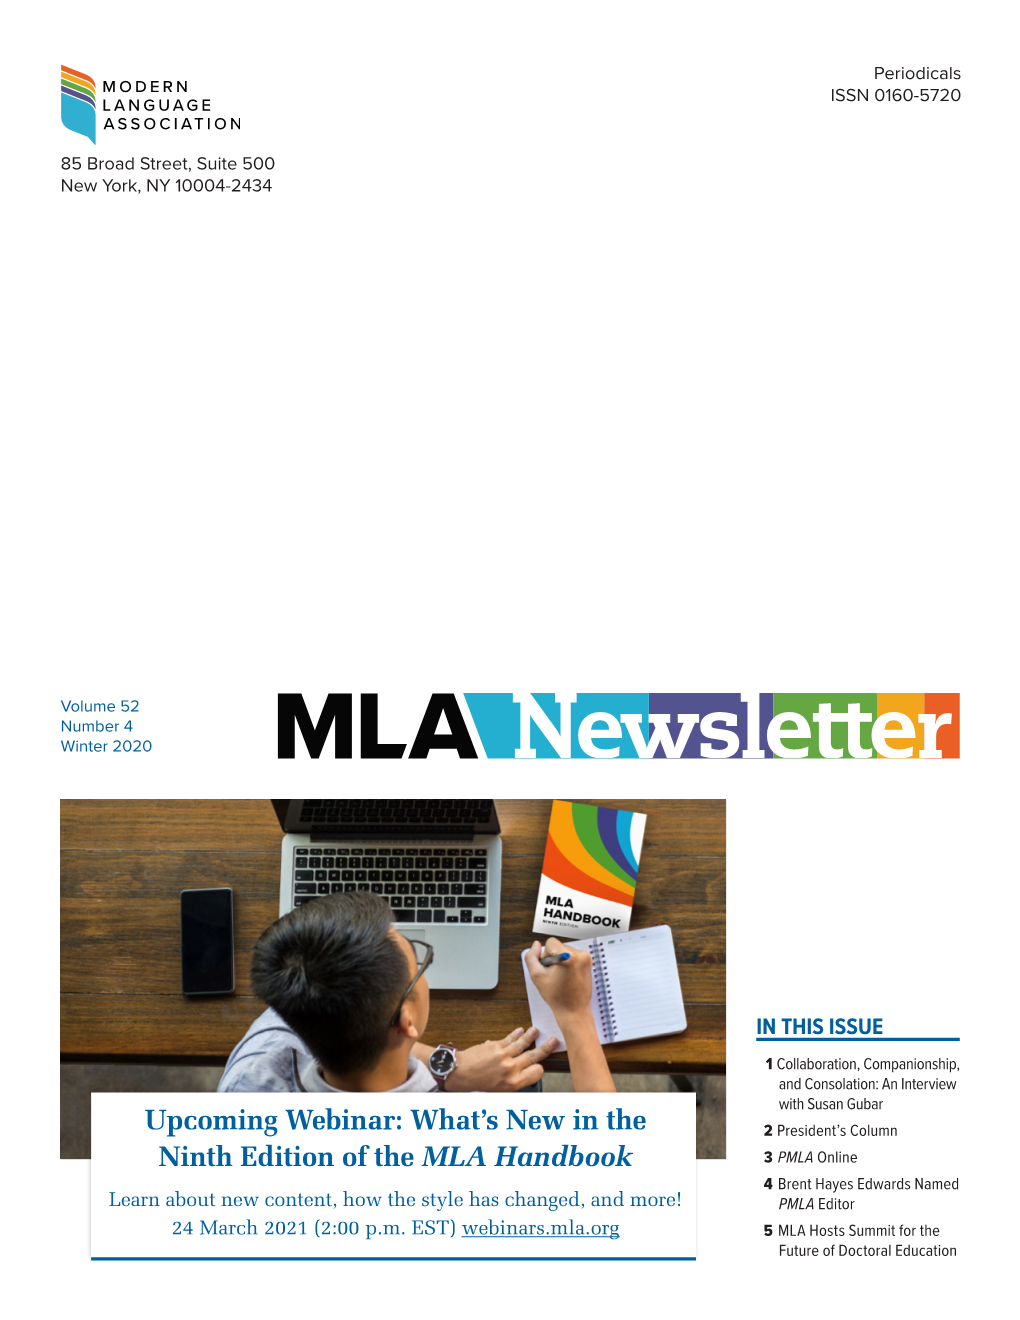 Upcoming Webinar: What's New in the Ninth Edition of the MLA Handbook